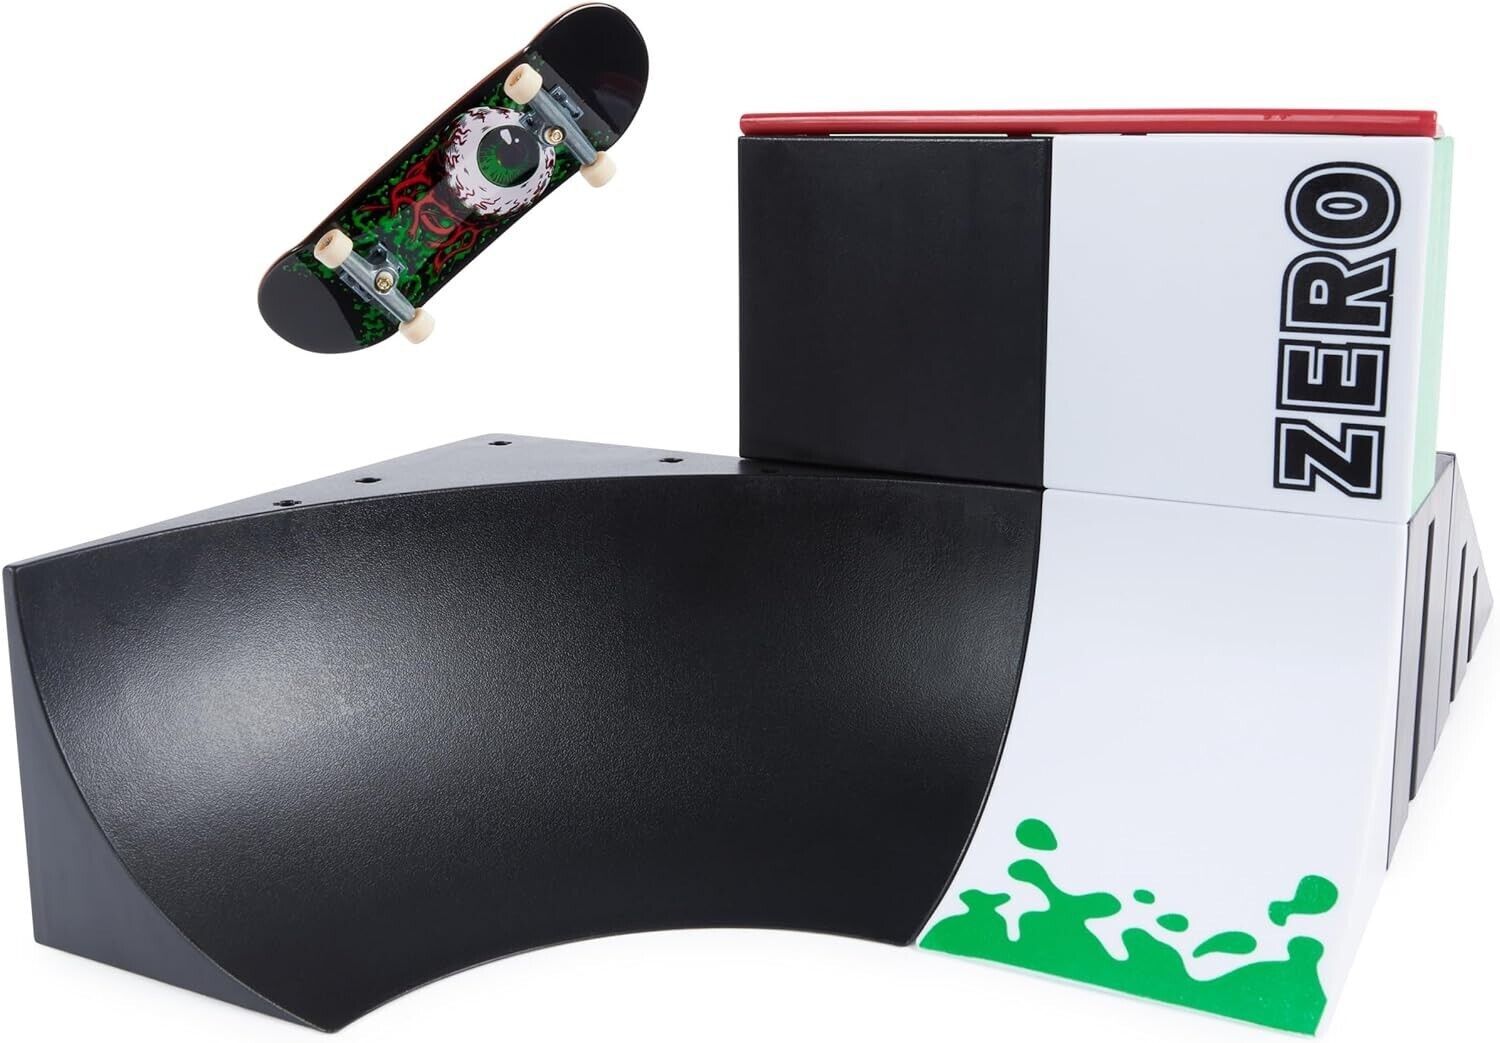 Tech Deck, Bowl Builder 2.0 X-Connect Park Creator, Customisable and Buildable R